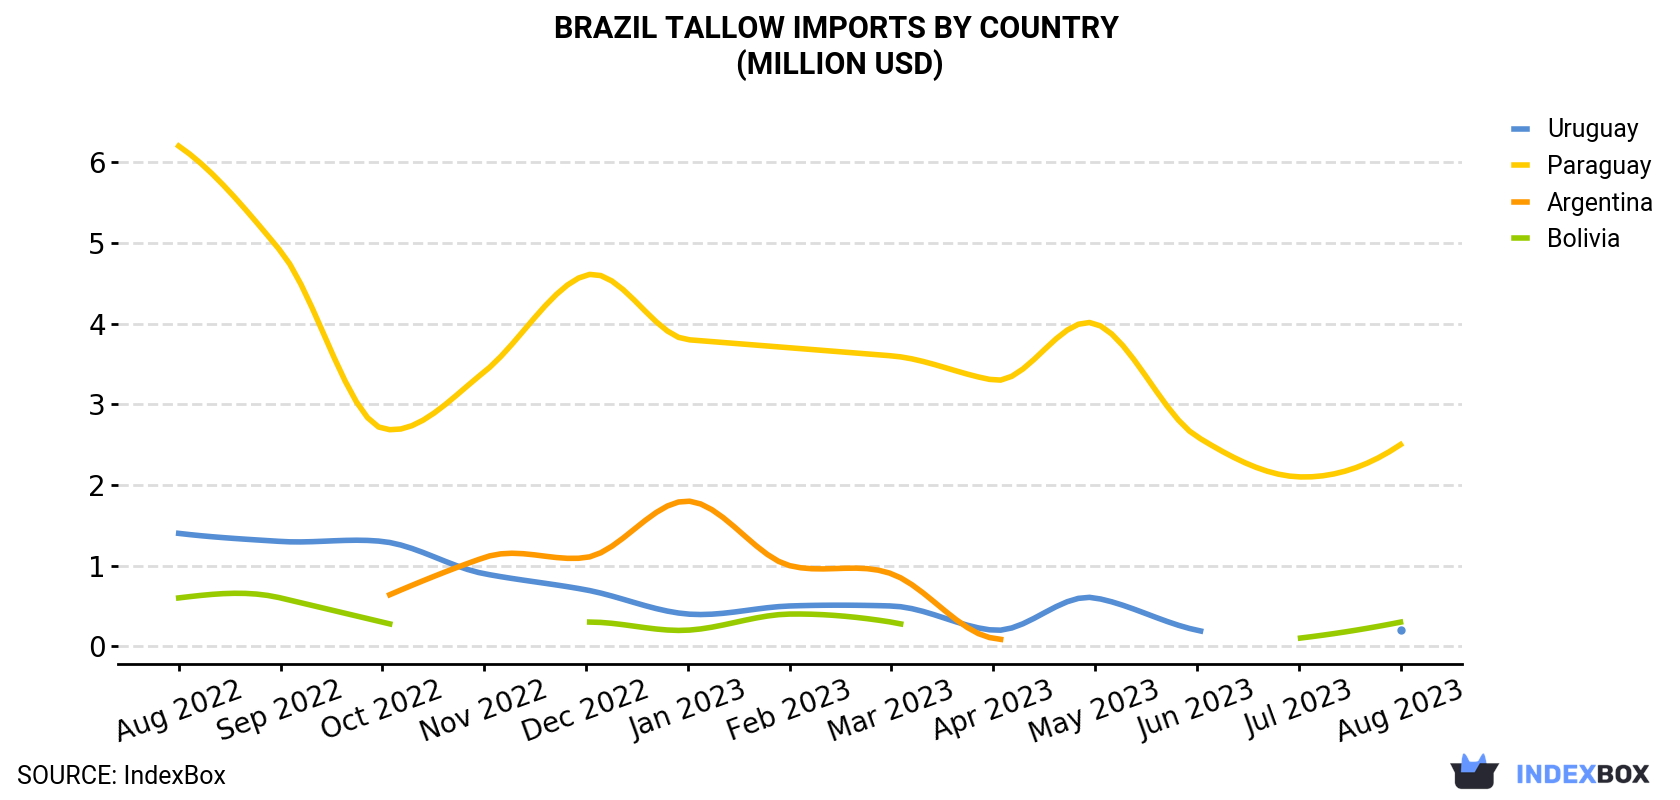 Brazil Tallow Imports By Country (Million USD)